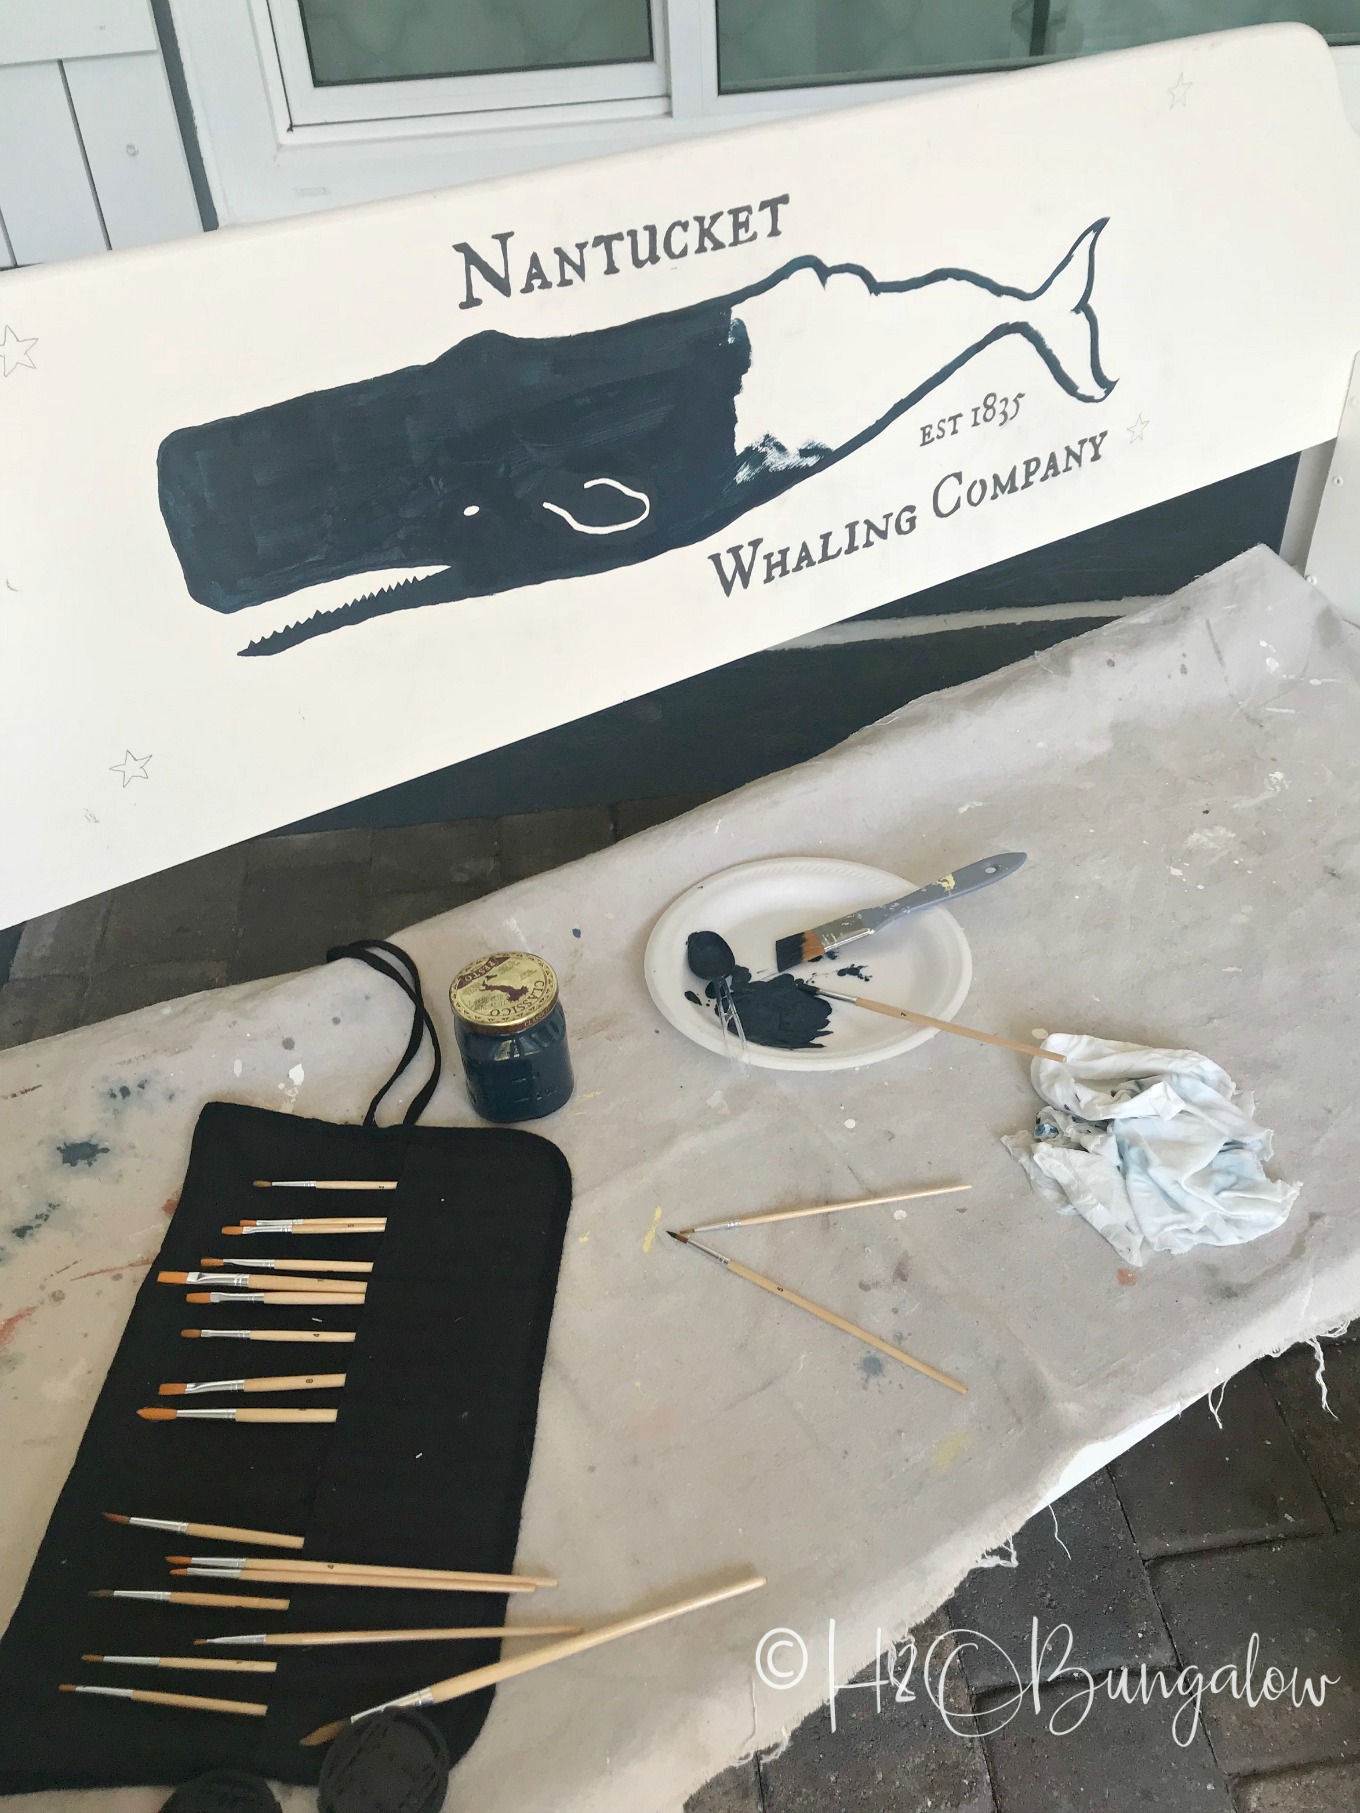 How to paint graphics on furniture video and blog tutorial. Download my whale design or follow my steps to create, enlarge and transfer your design to paint on furniture, a sign or any flat surface. You'll find an awesome list of resources in this post too! 